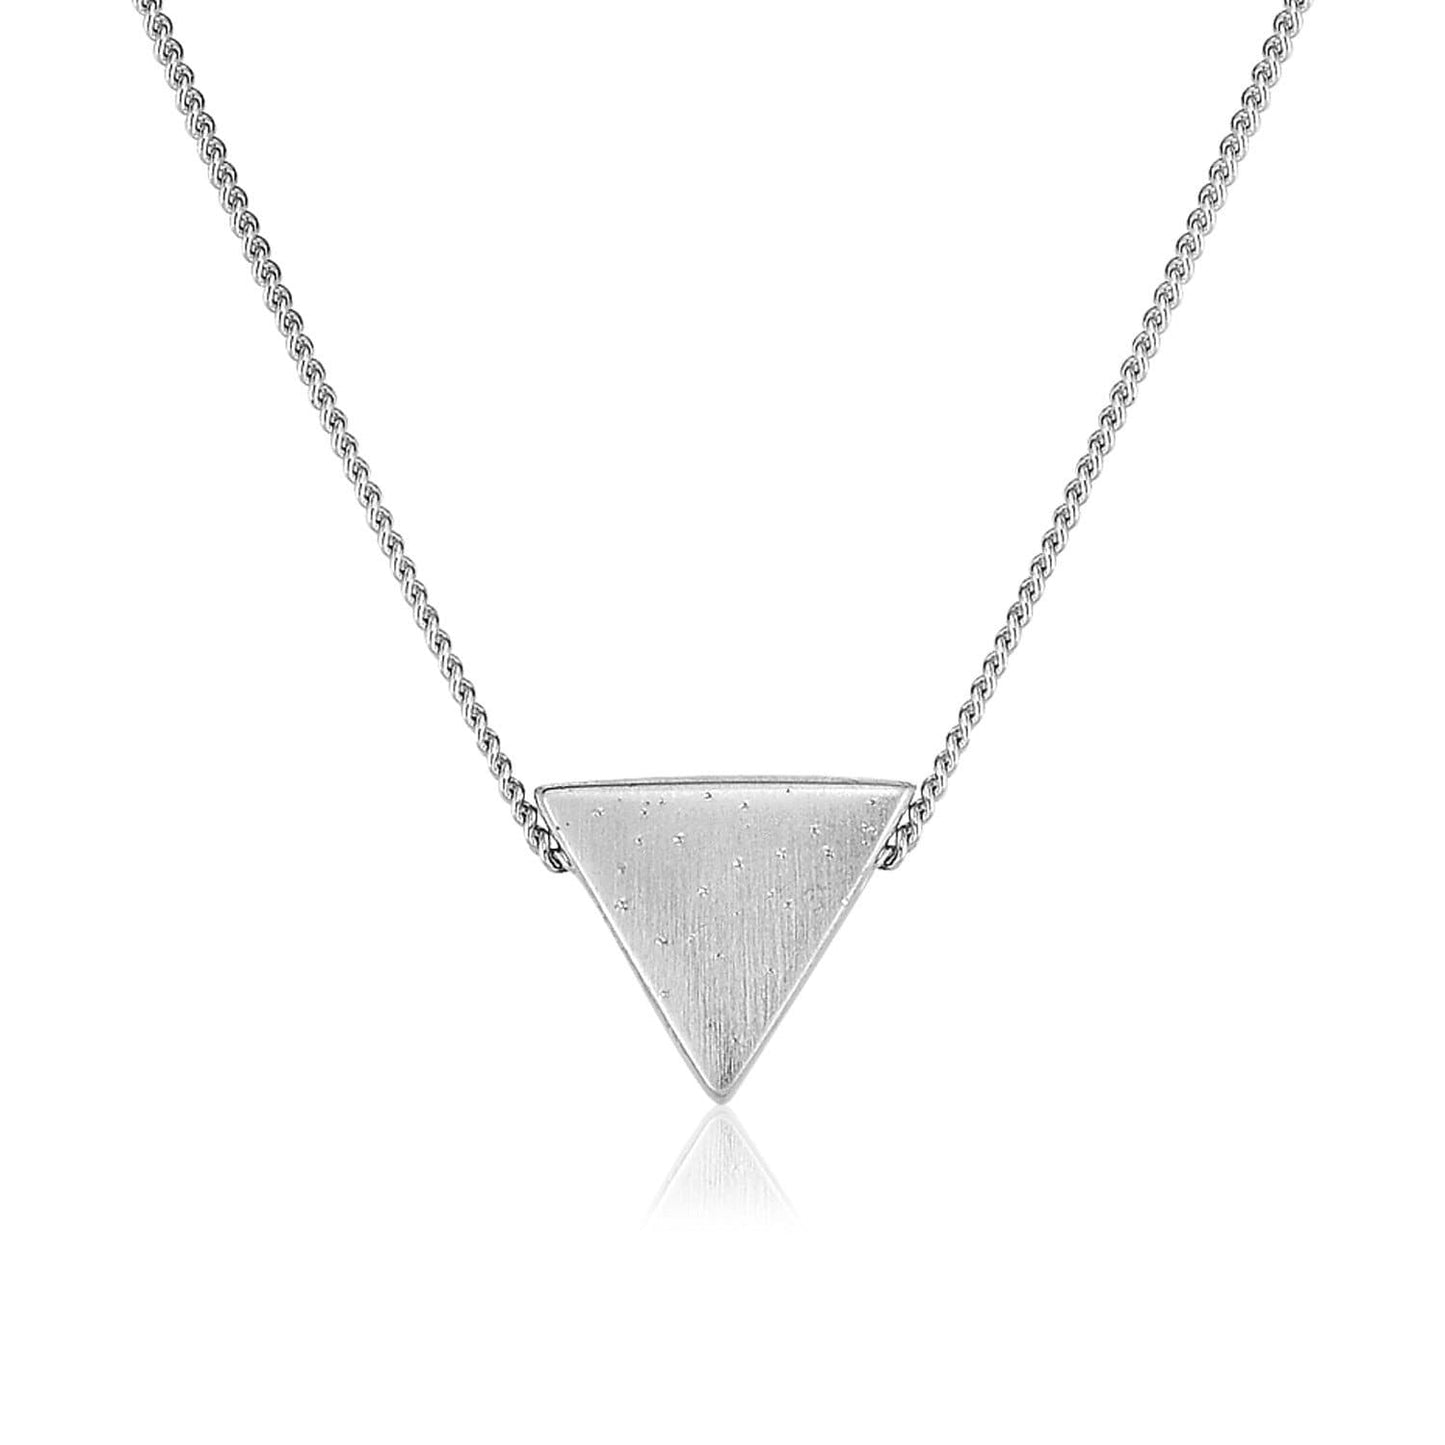 Sterling Silver 18 inch Triangle Necklace with Sparkle Texture